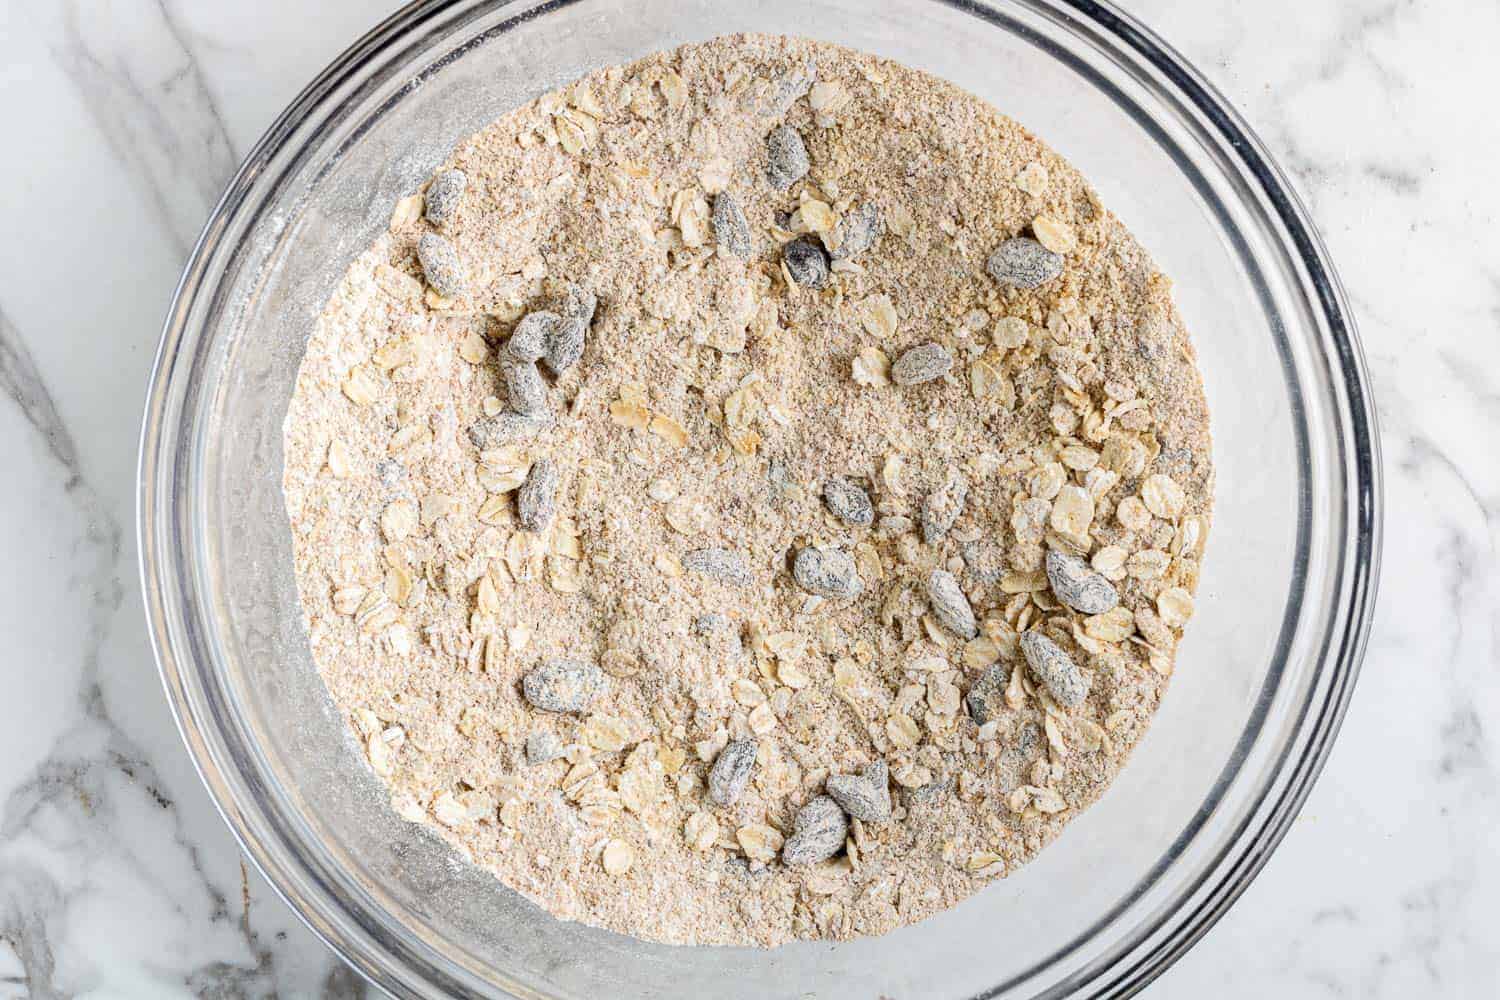 Dry ingredients in a clear glass mixing bowl.